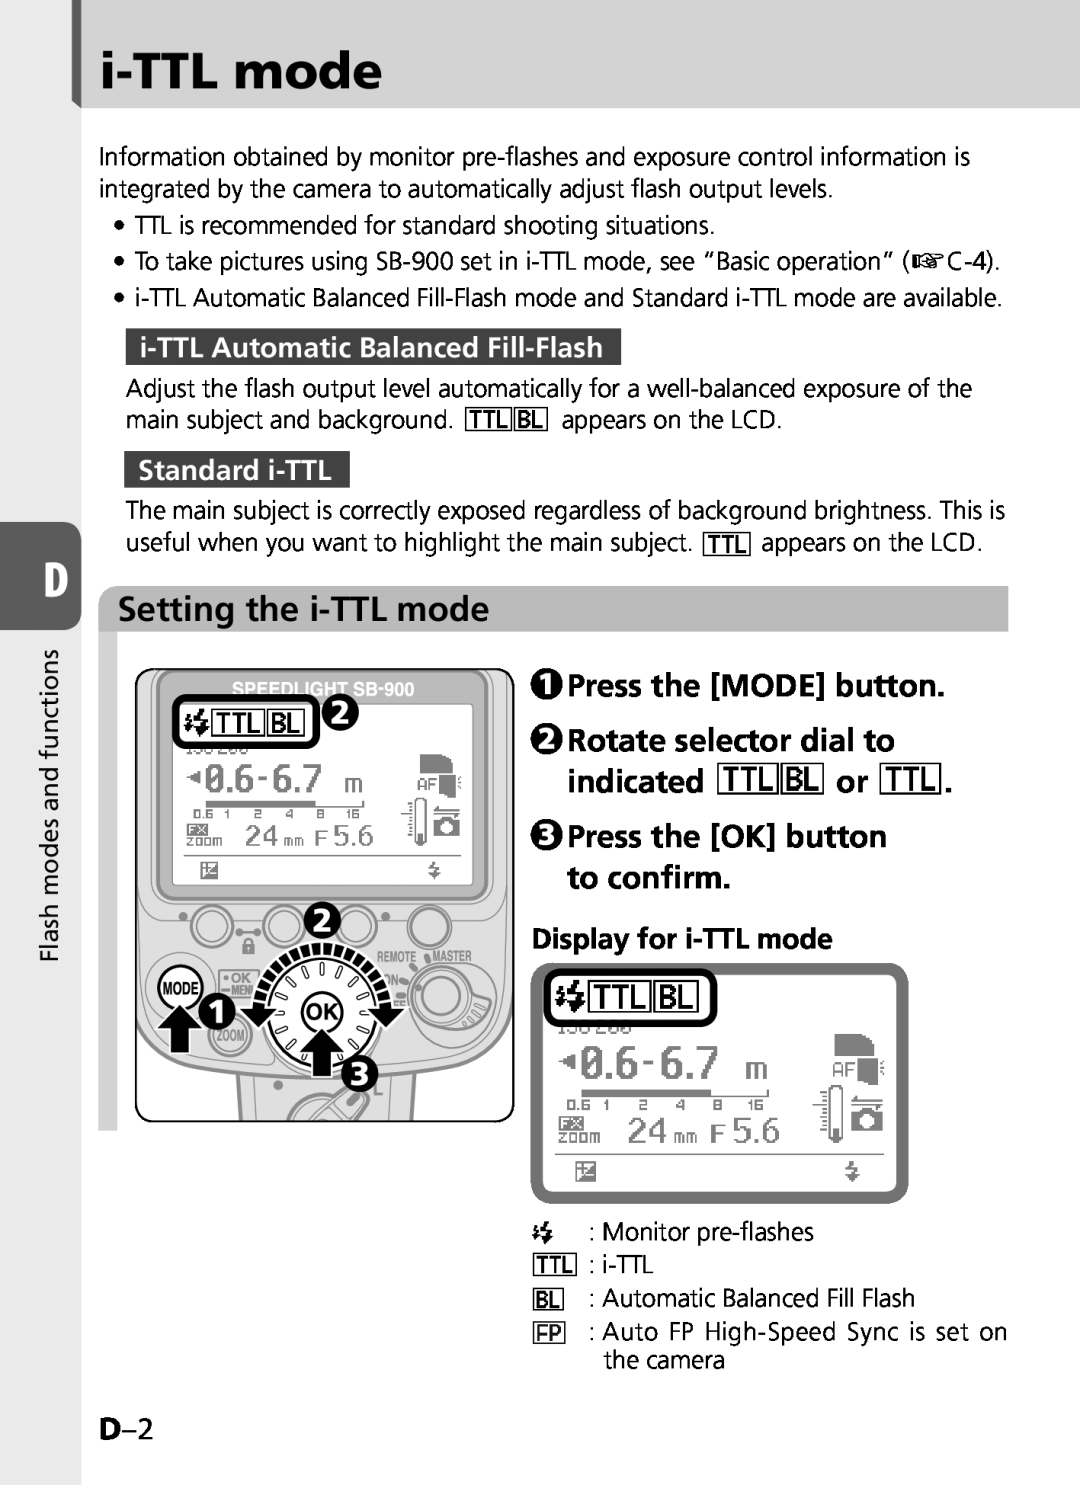 Univex SB-900 user manual Setting the i-TTLmode, Press the MODE button Rotate selector dial to, Display for i-TTLmode 